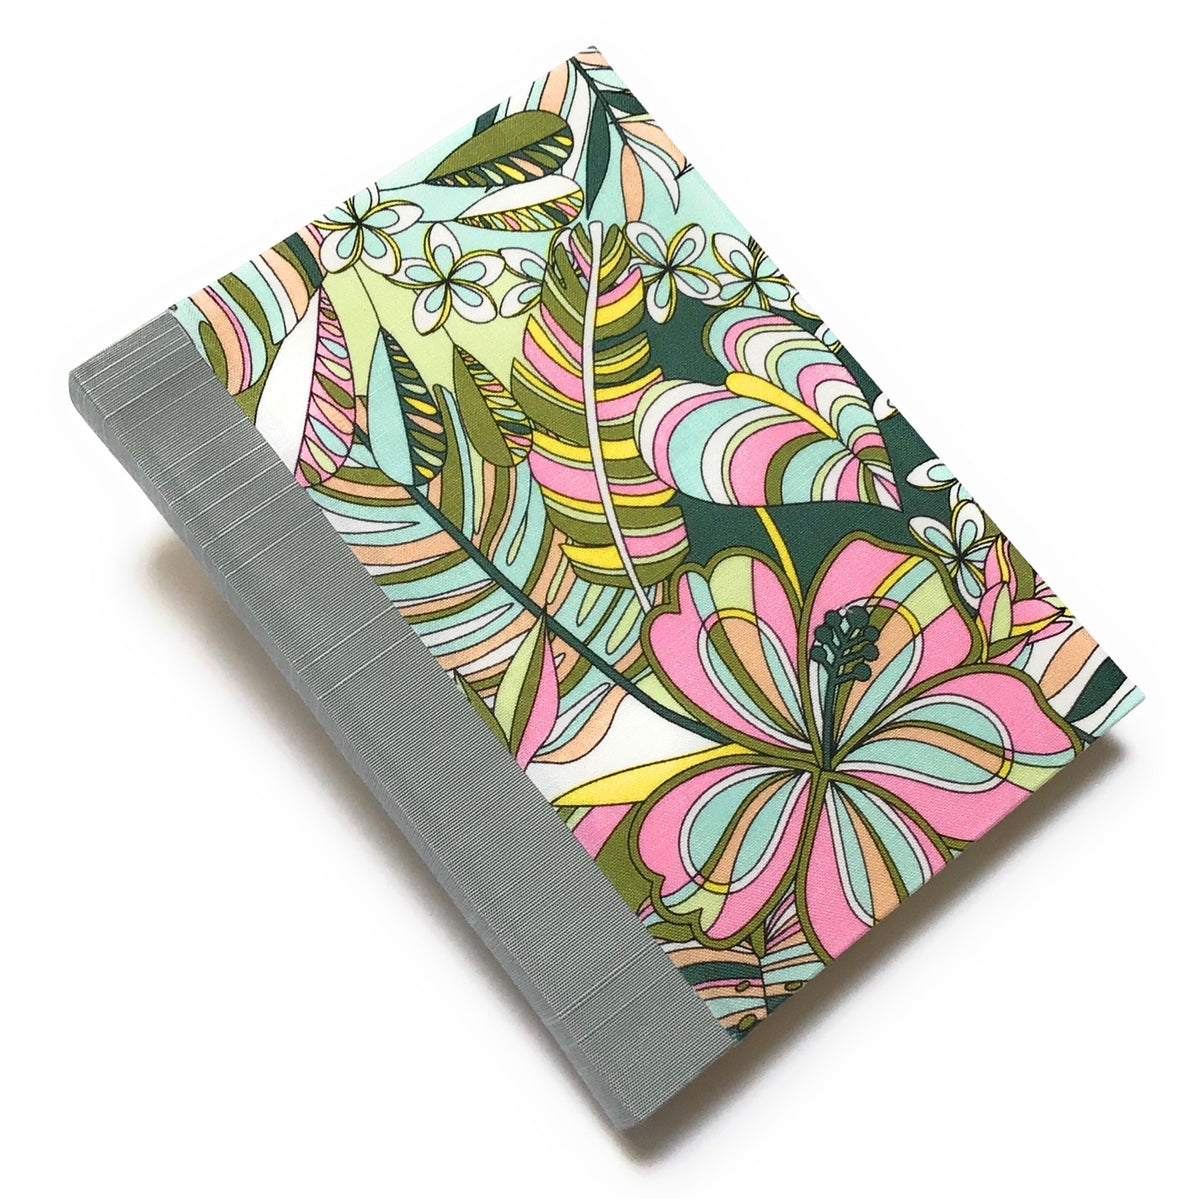 Pink, blue green, green, yellow, salmon colored, and white tropical flowers and leaves patterned journal with blue gray Japanese bookcloth spine. 220 blank pages. 5 x 7.